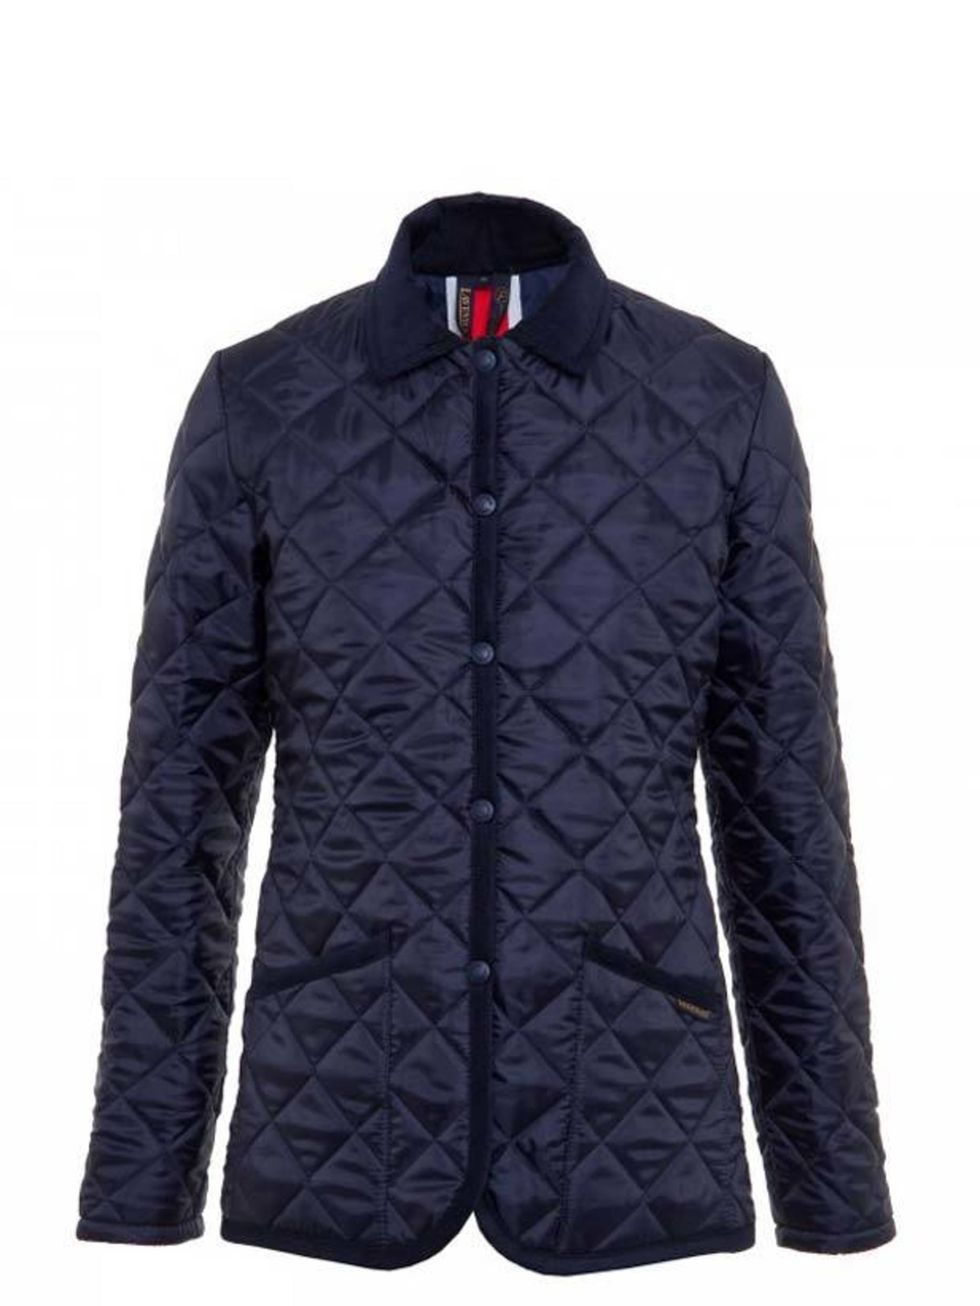 <p> </p><p>Channel the English heritage look by injecting some royal chic to your urban wardrobe with this quilted jacket. Lavenham quilted jacket, £190, at <a href="http://www.harveynichols.com/womens/categories/designer-jackets/casual/s345410-raydon-uni